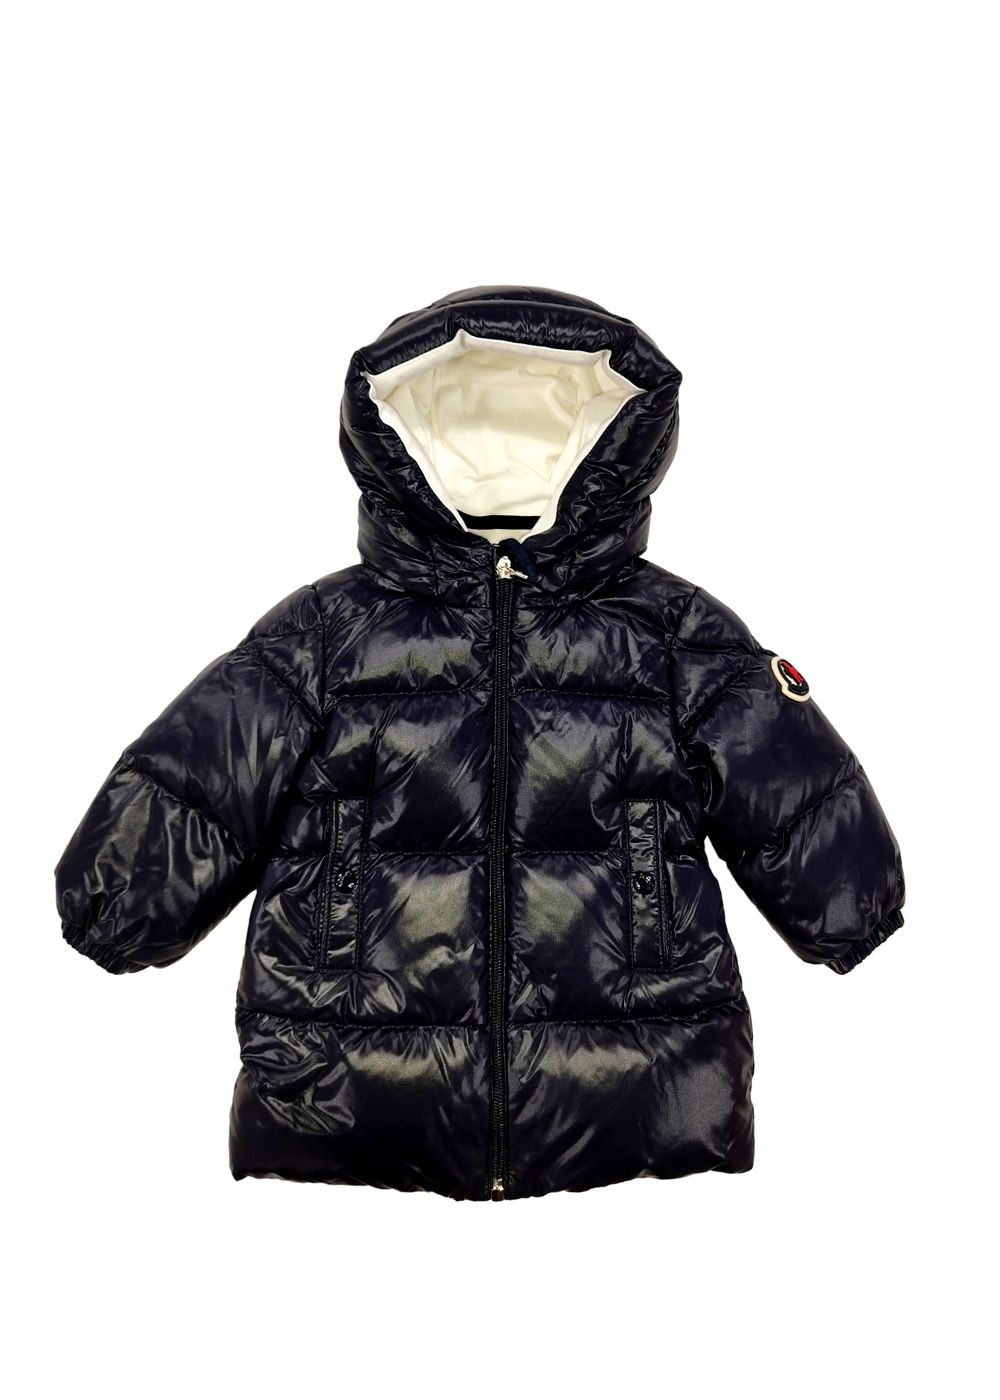 Featured image for “MONCLER CANSU GIUBBINO”